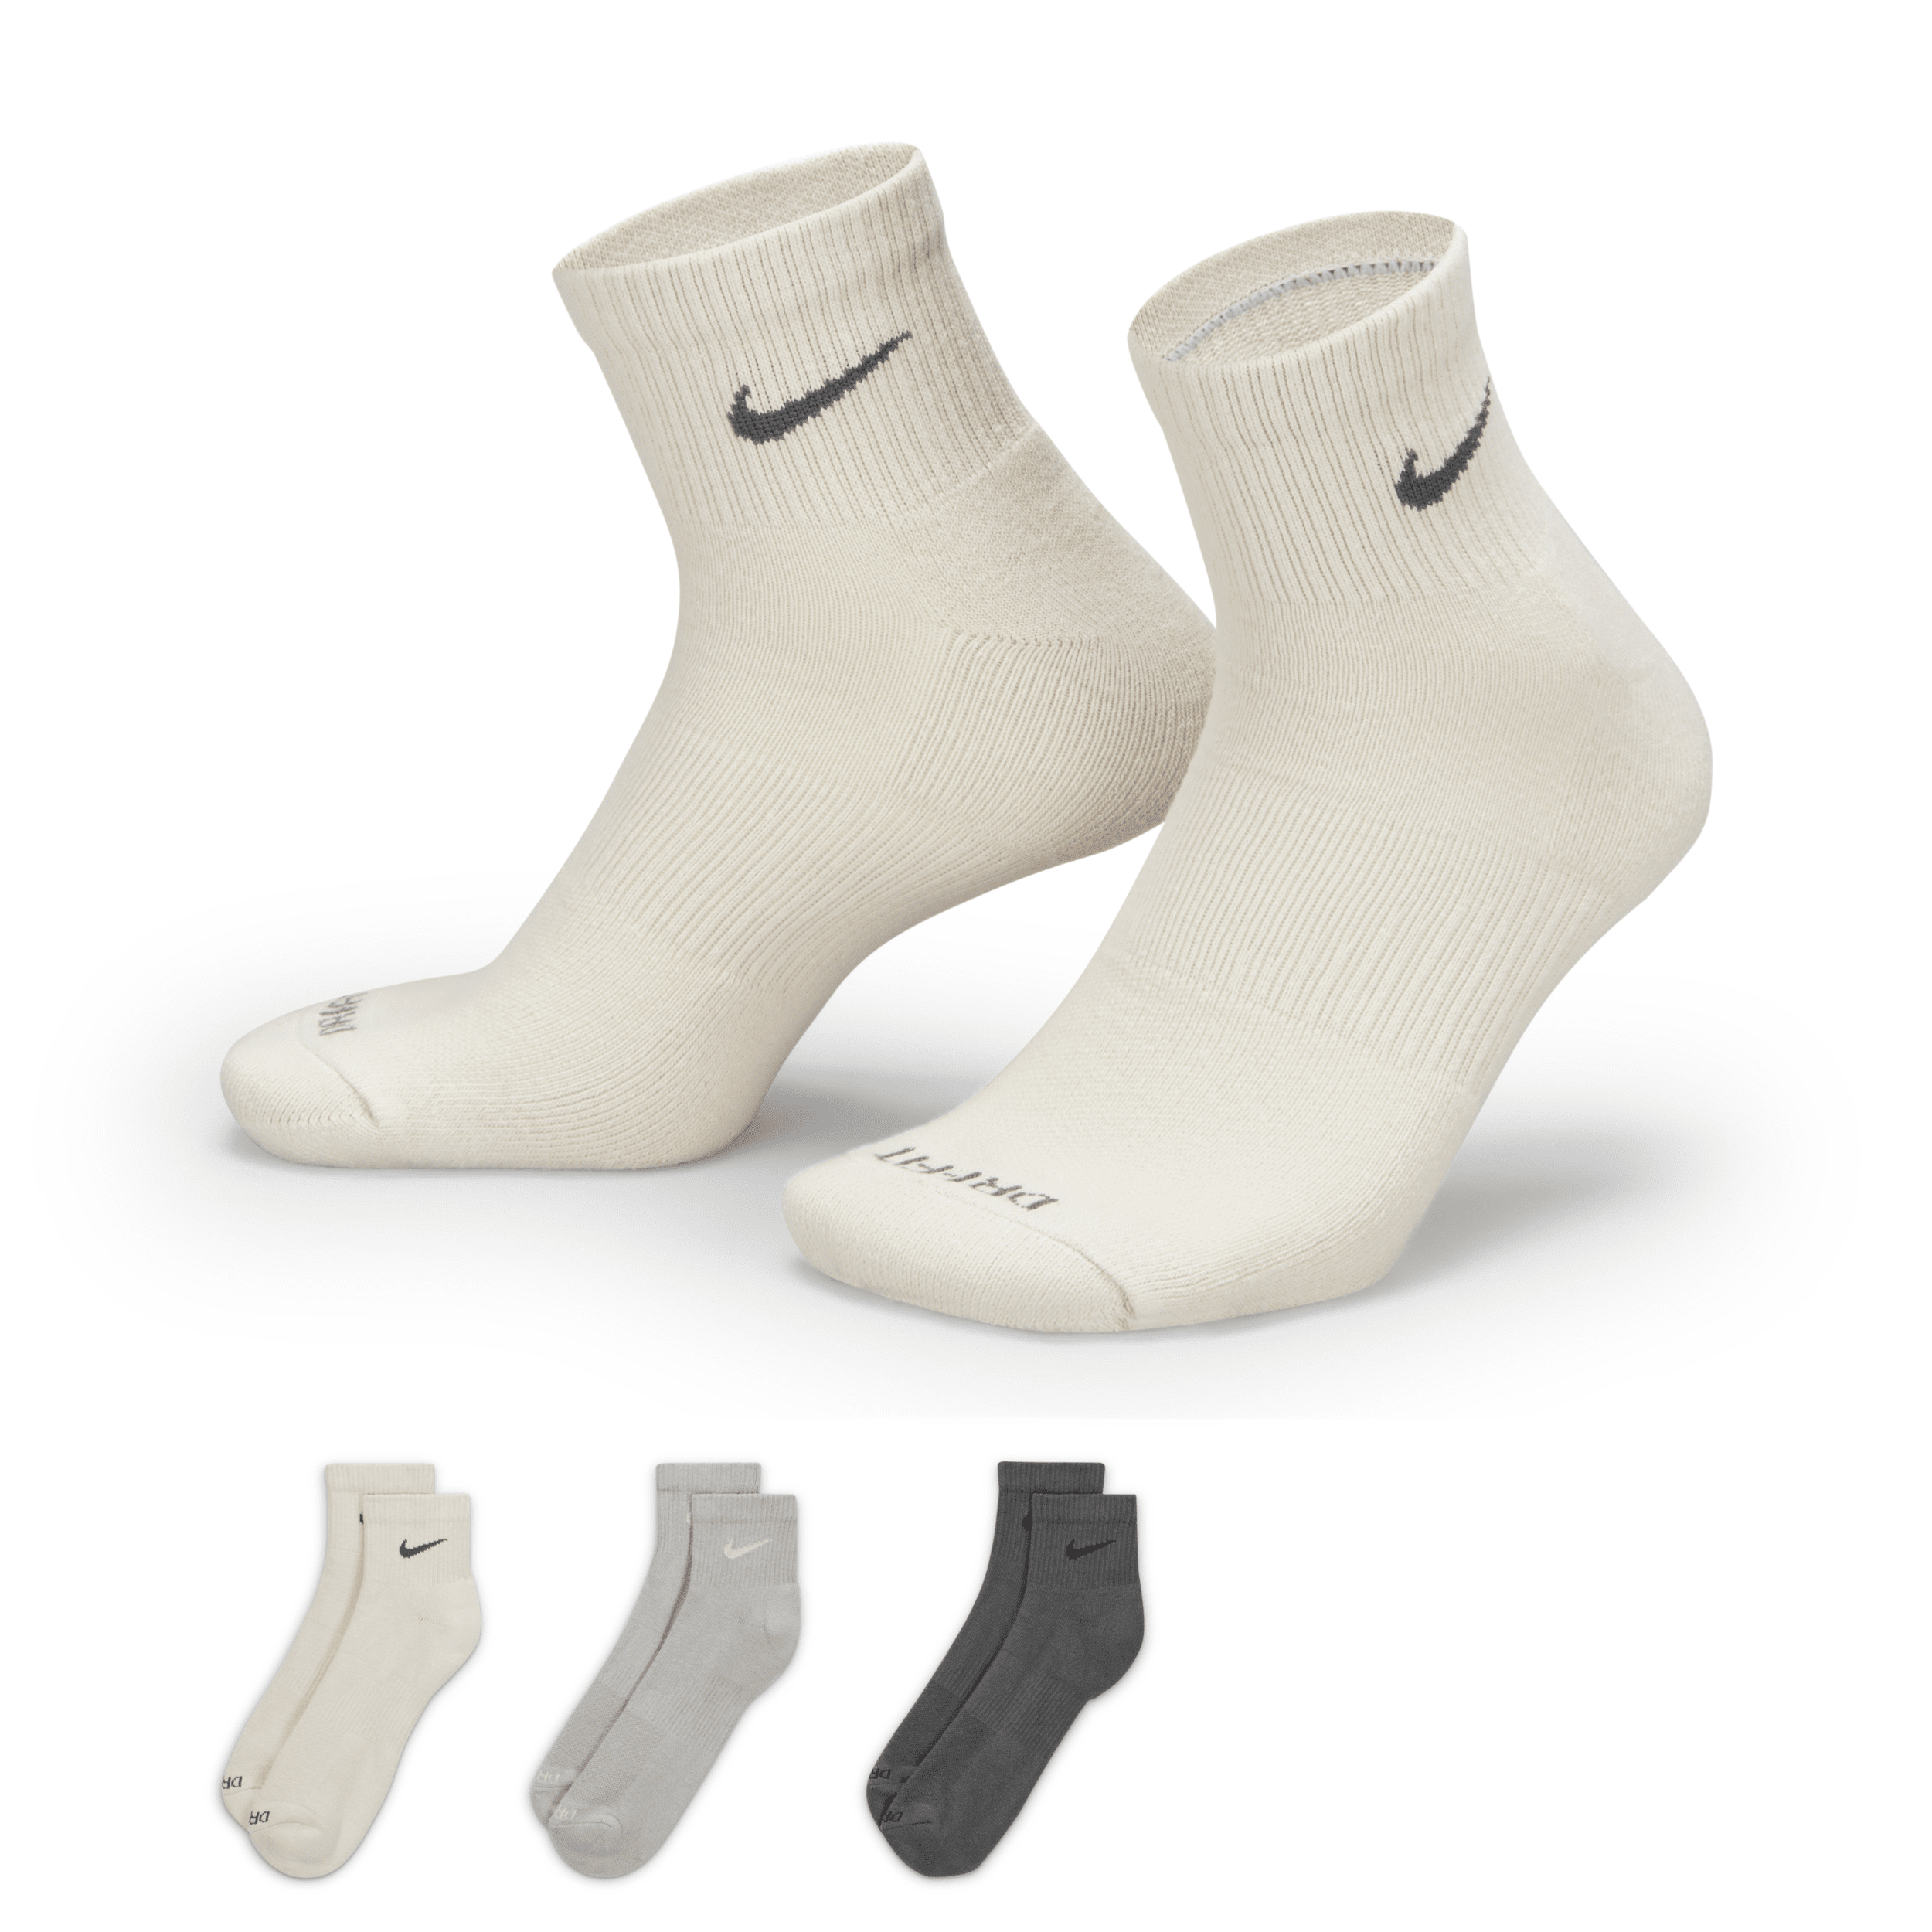 Nike Men's Everyday Plus Cushioned Training Ankle Socks (3 Pairs) In Multicolor